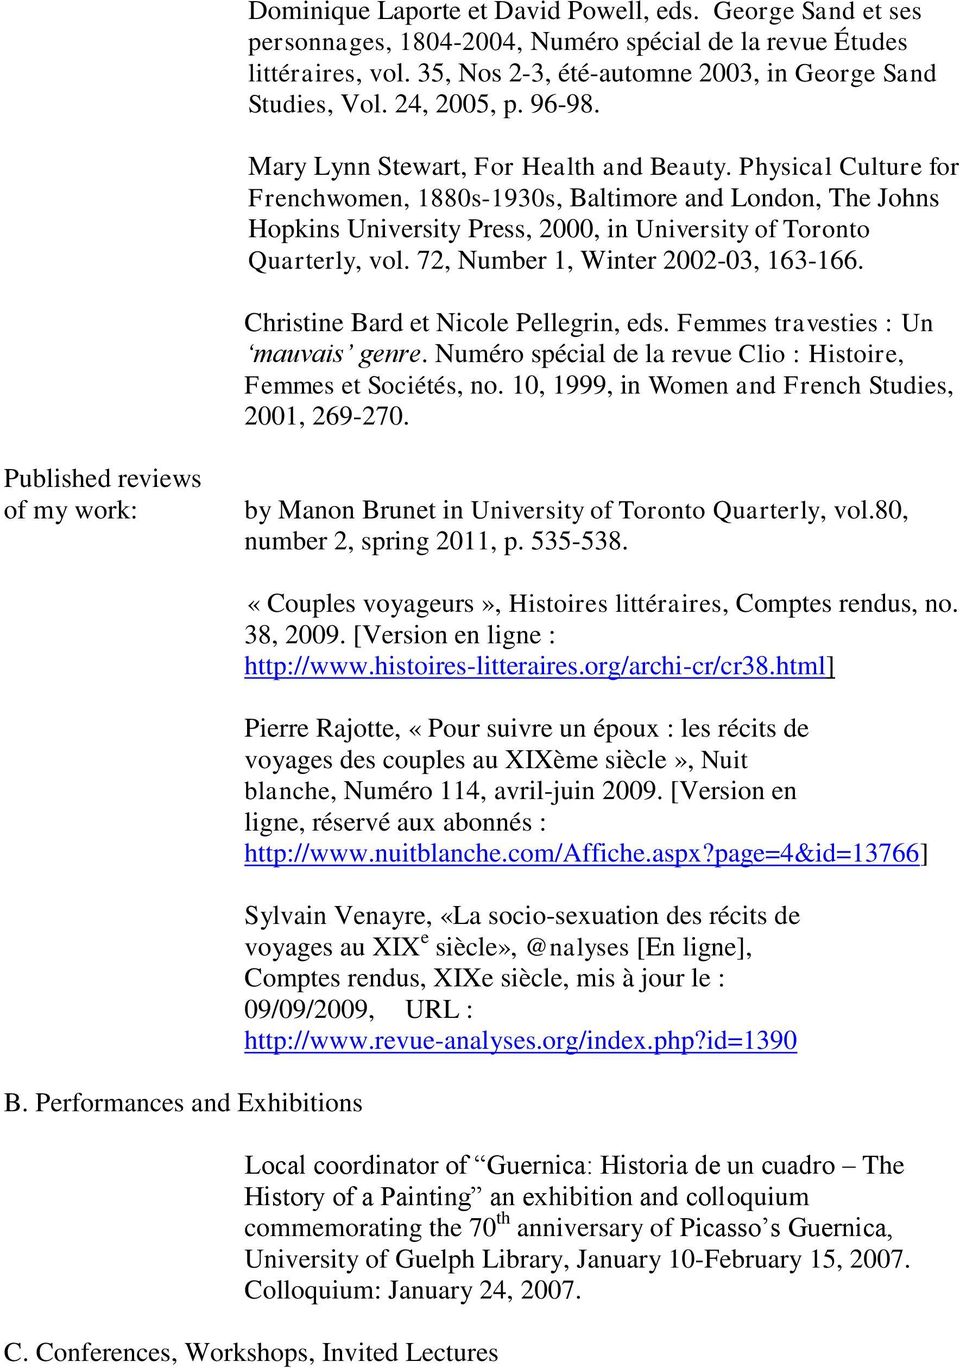 Physical Culture for Frenchwomen, 1880s-1930s, Baltimore and London, The Johns Hopkins University Press, 2000, in University of Toronto Quarterly, vol. 72, Number 1, Winter 2002-03, 163-166.